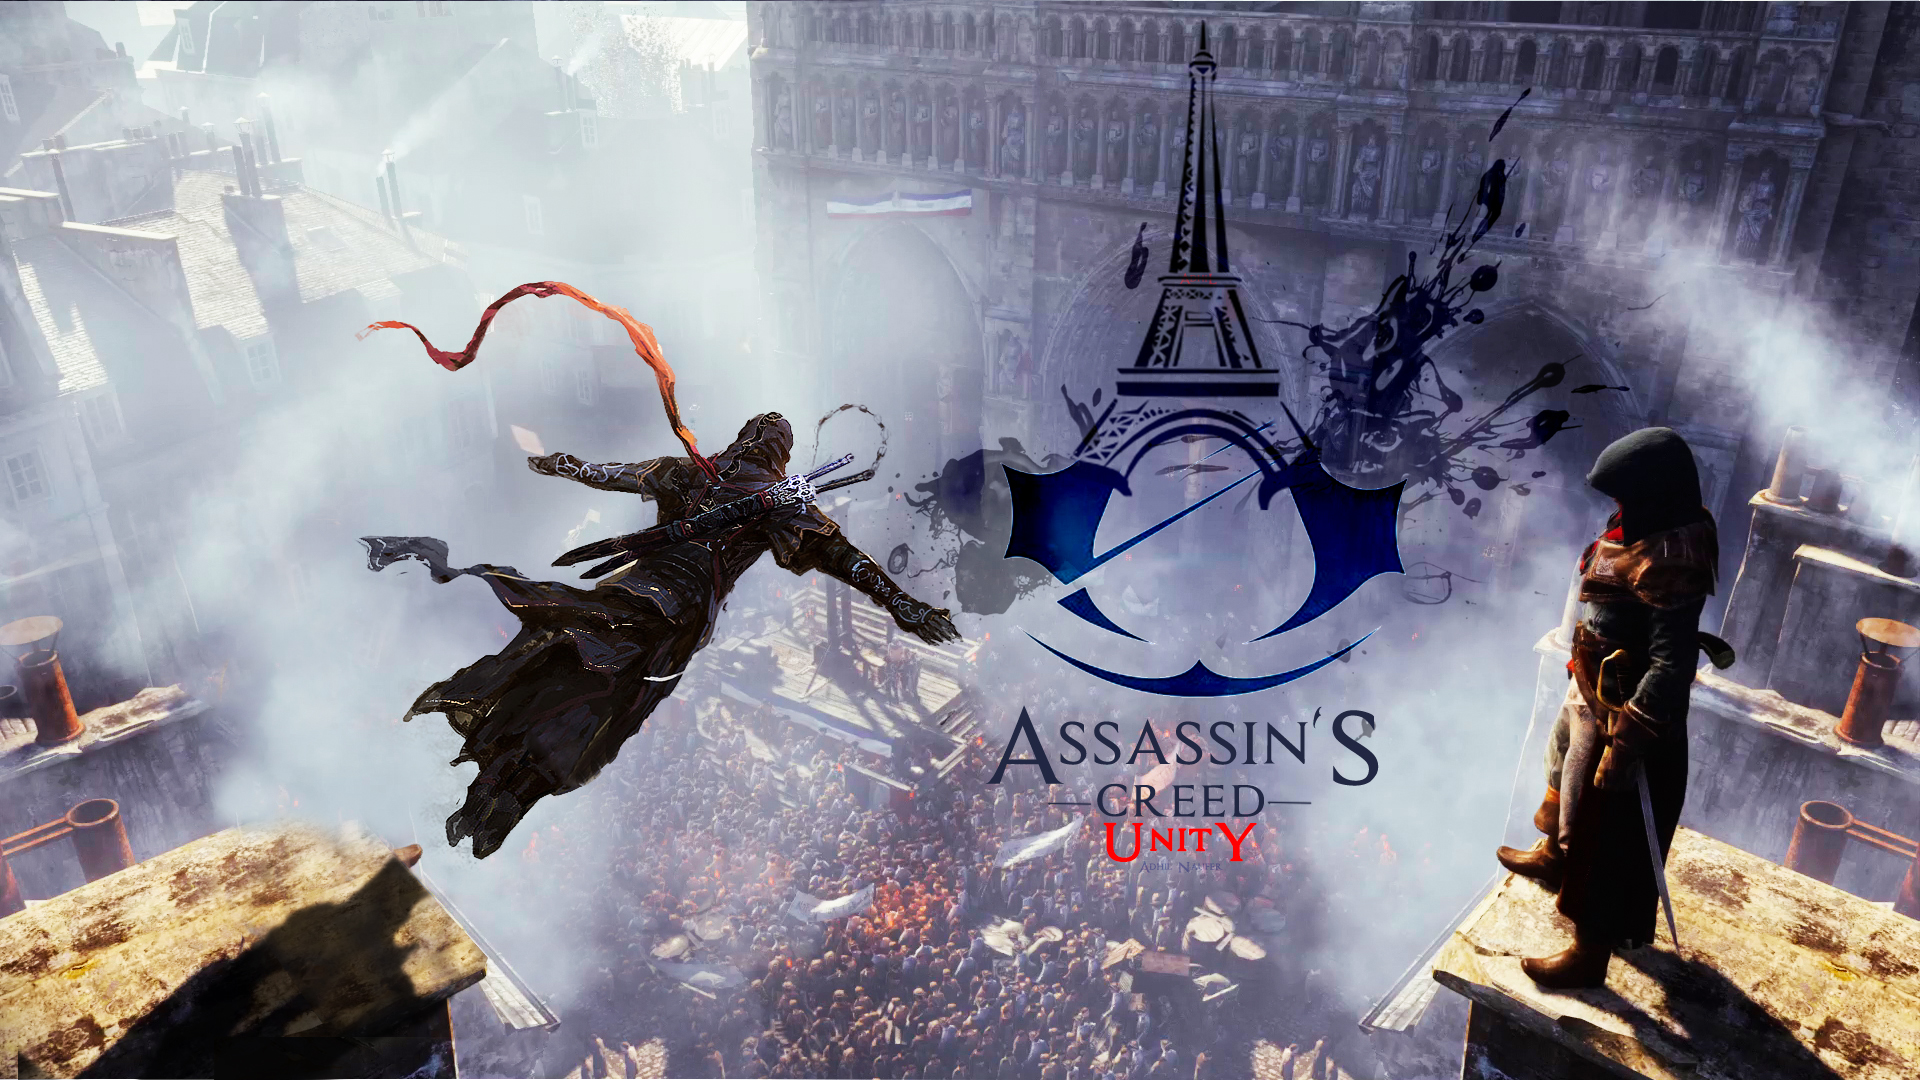 assassin's creed: unity, video game, assassin's creed download HD wallpaper